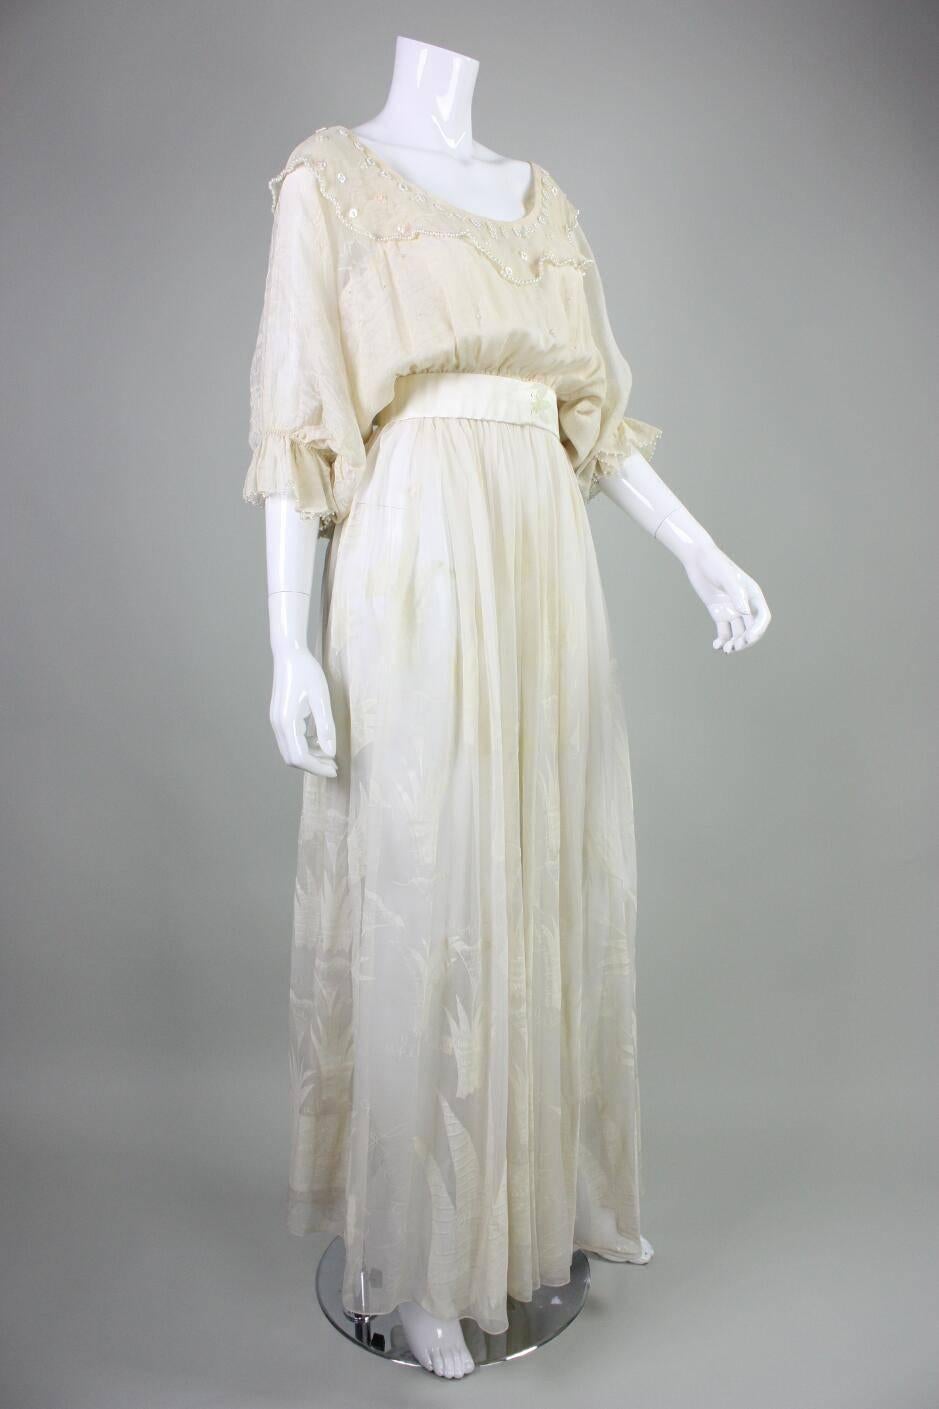 Vintage gown from Zandra Rhodes is made of ivory silk chiffon with her iconic 